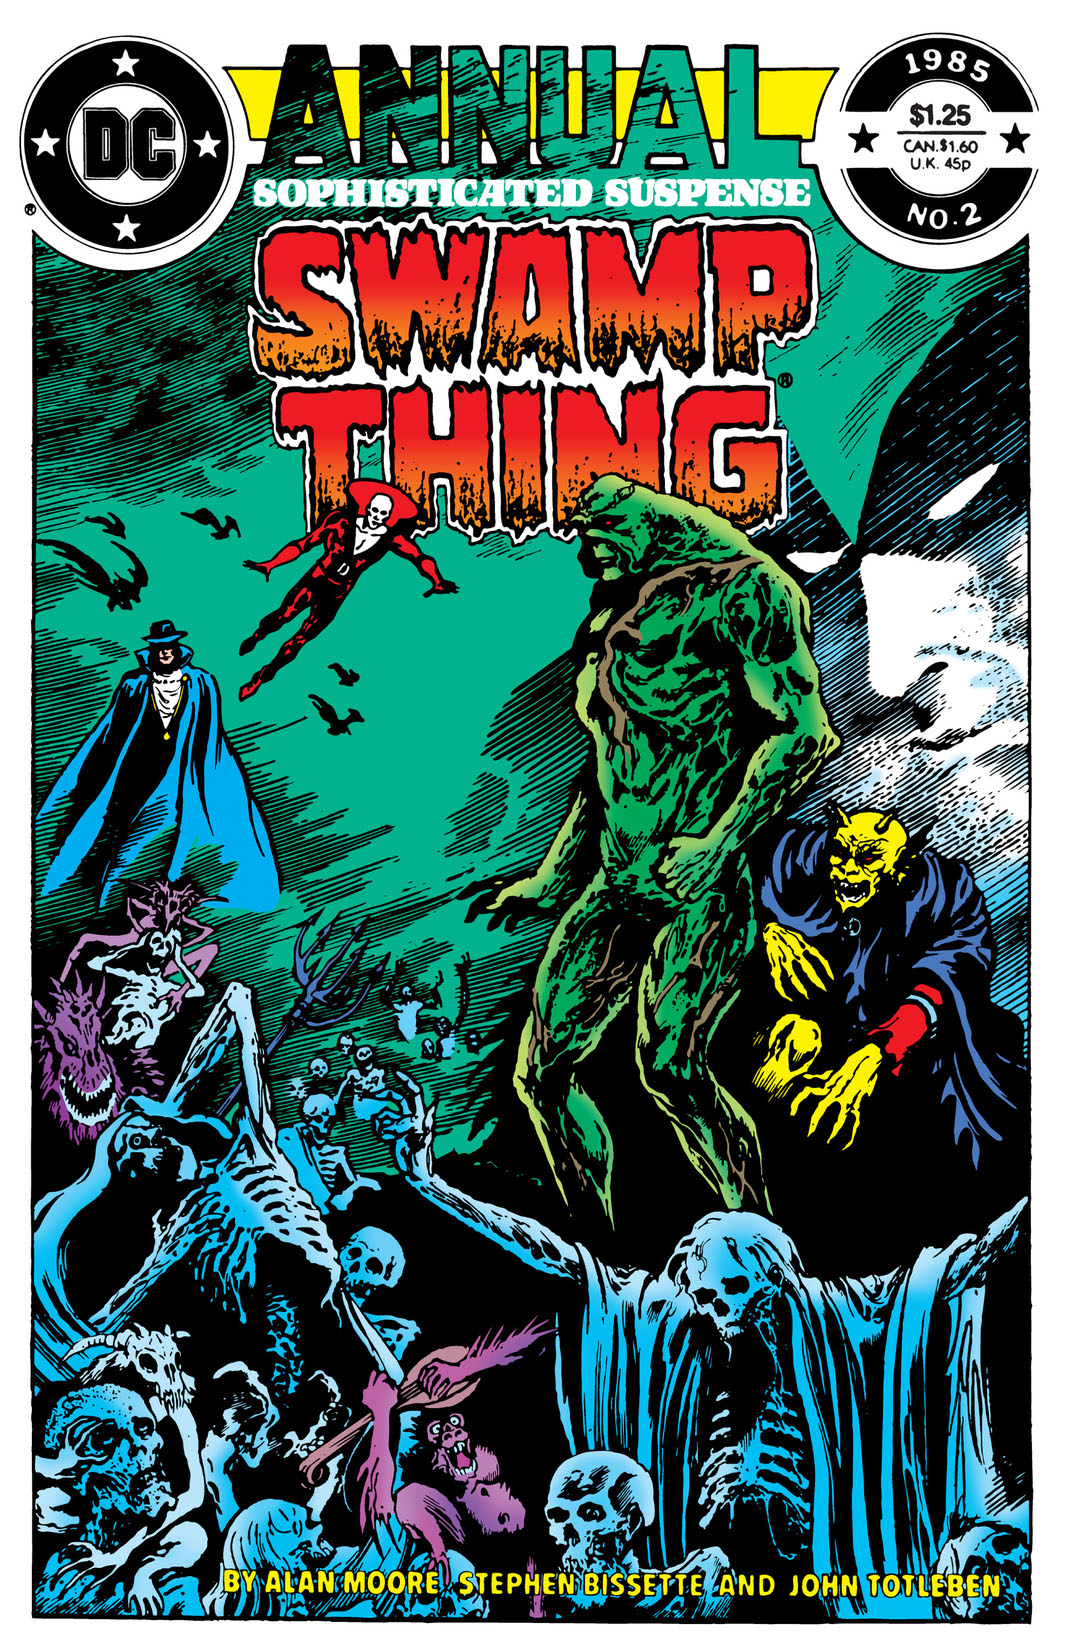 Swamp Thing Annual (1985-) #2 preview images